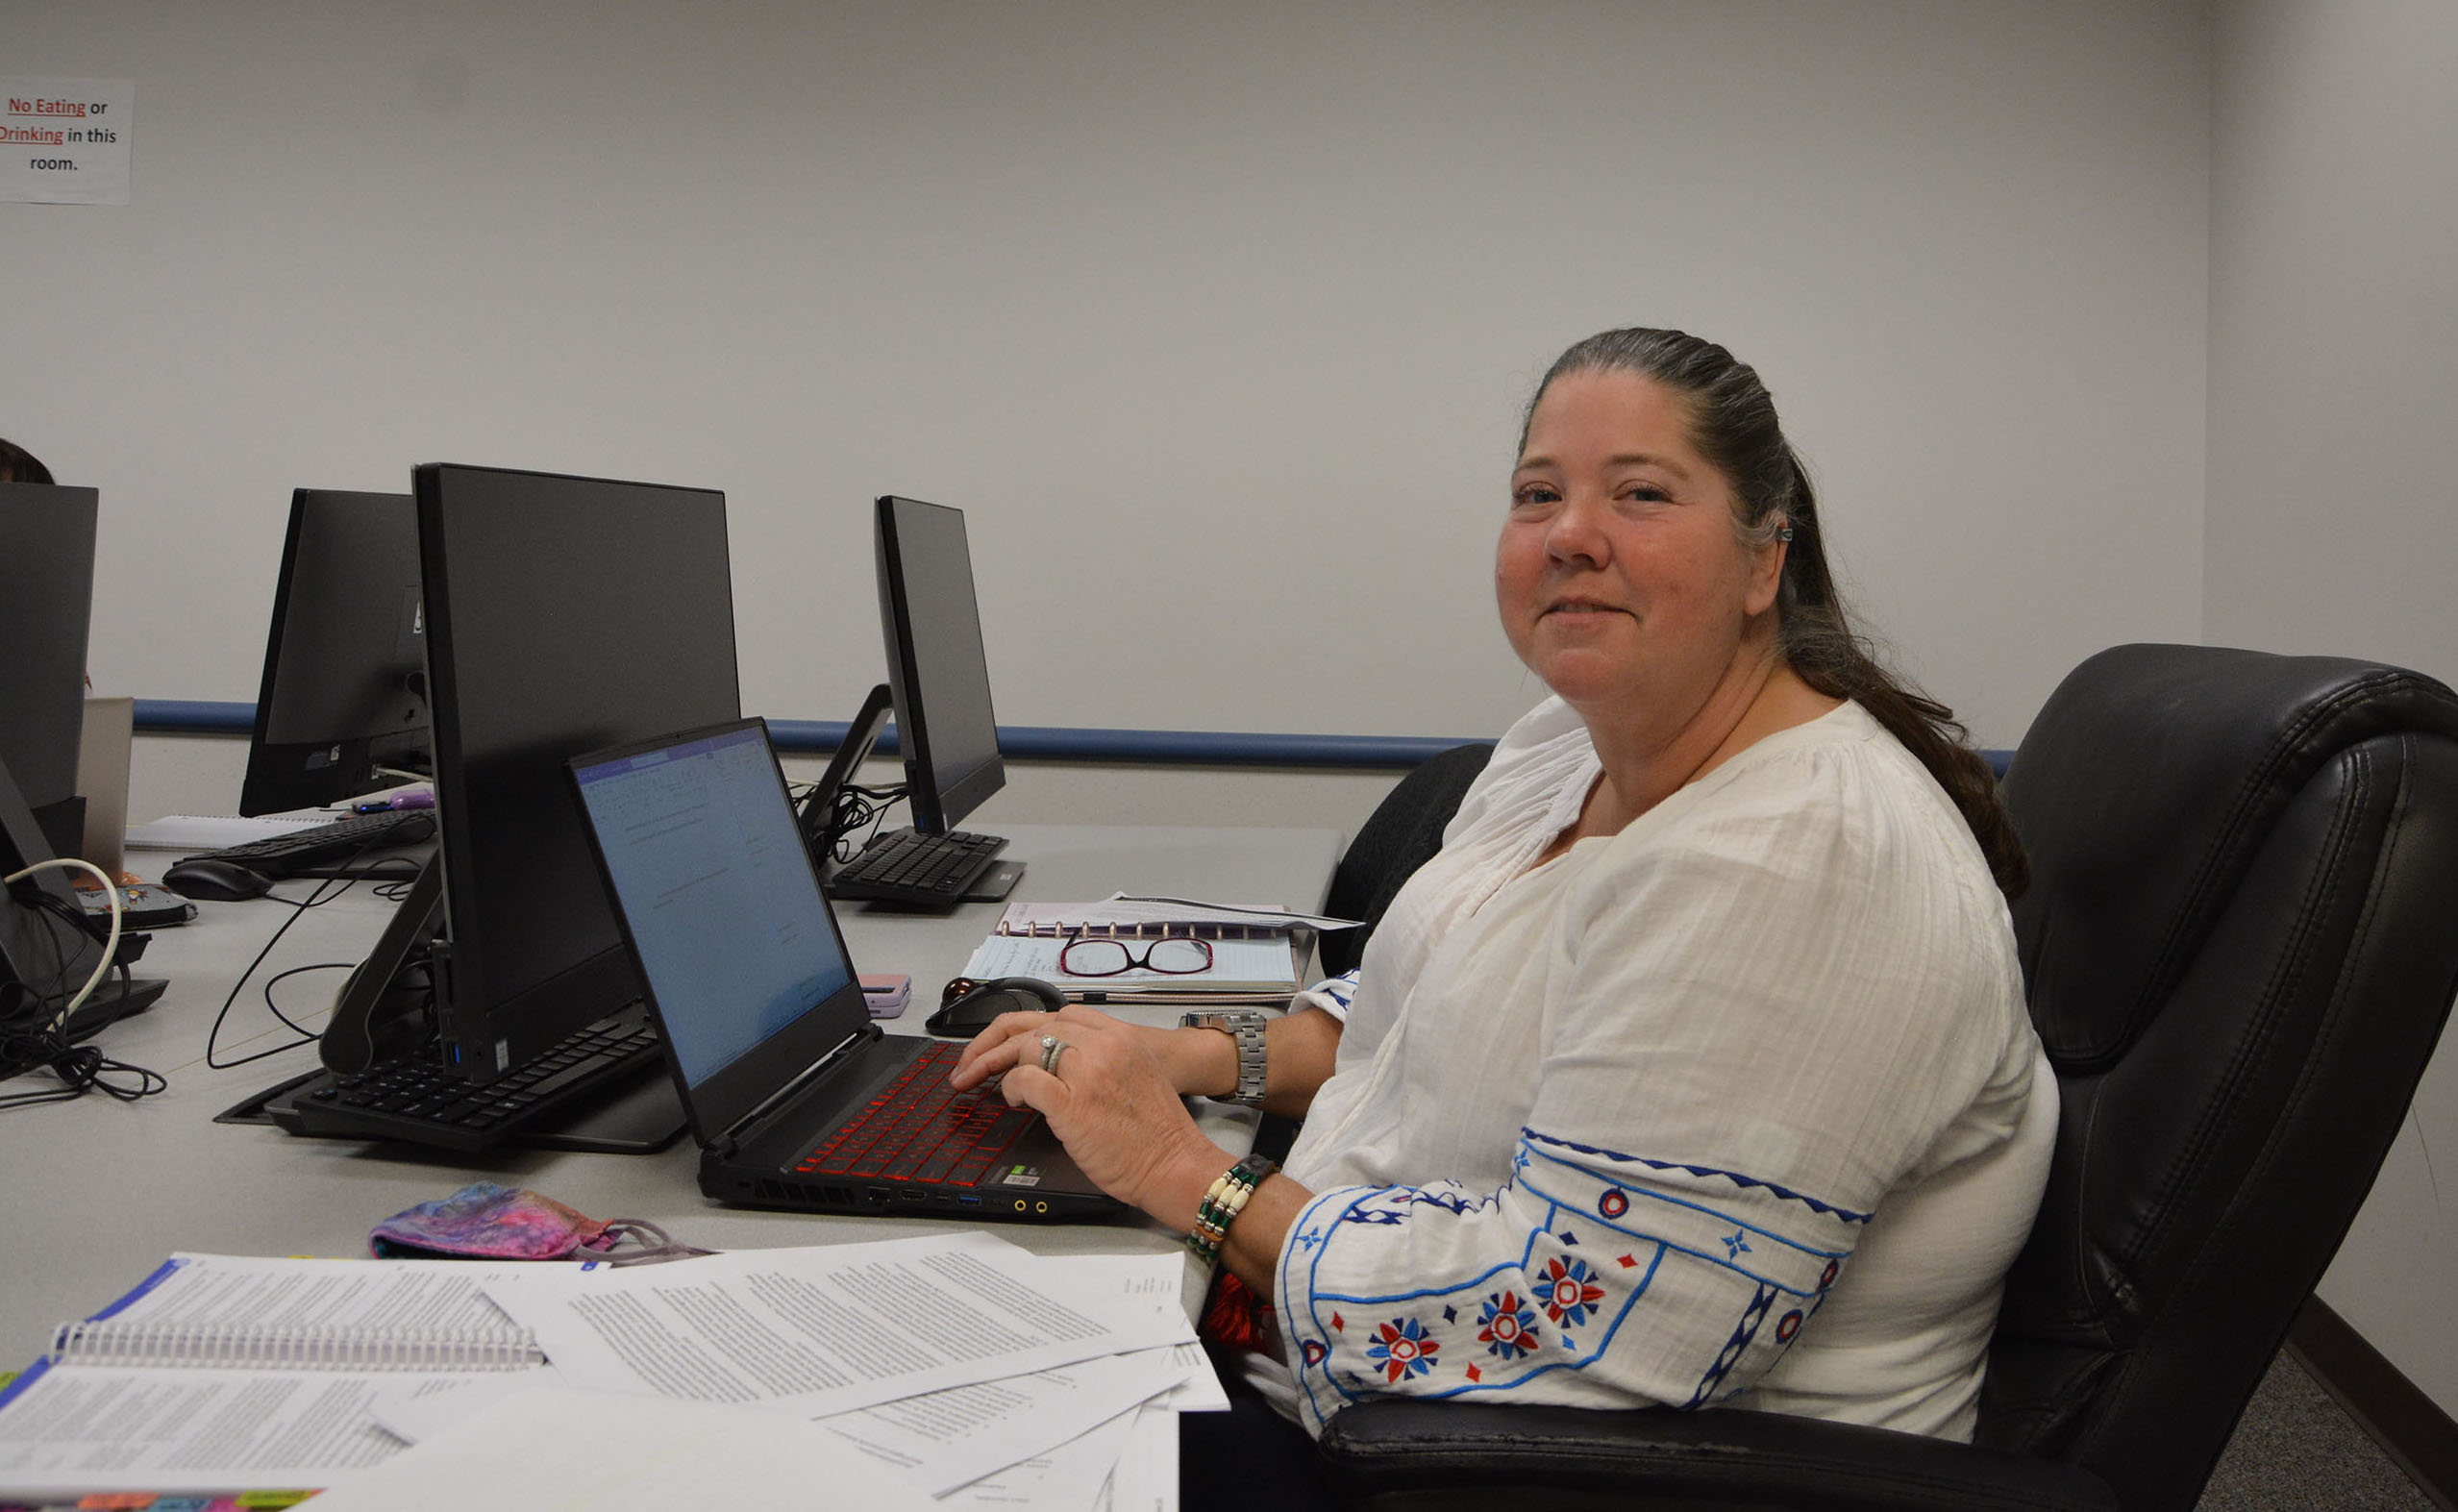 SWIC paralegal student studying in the classroom